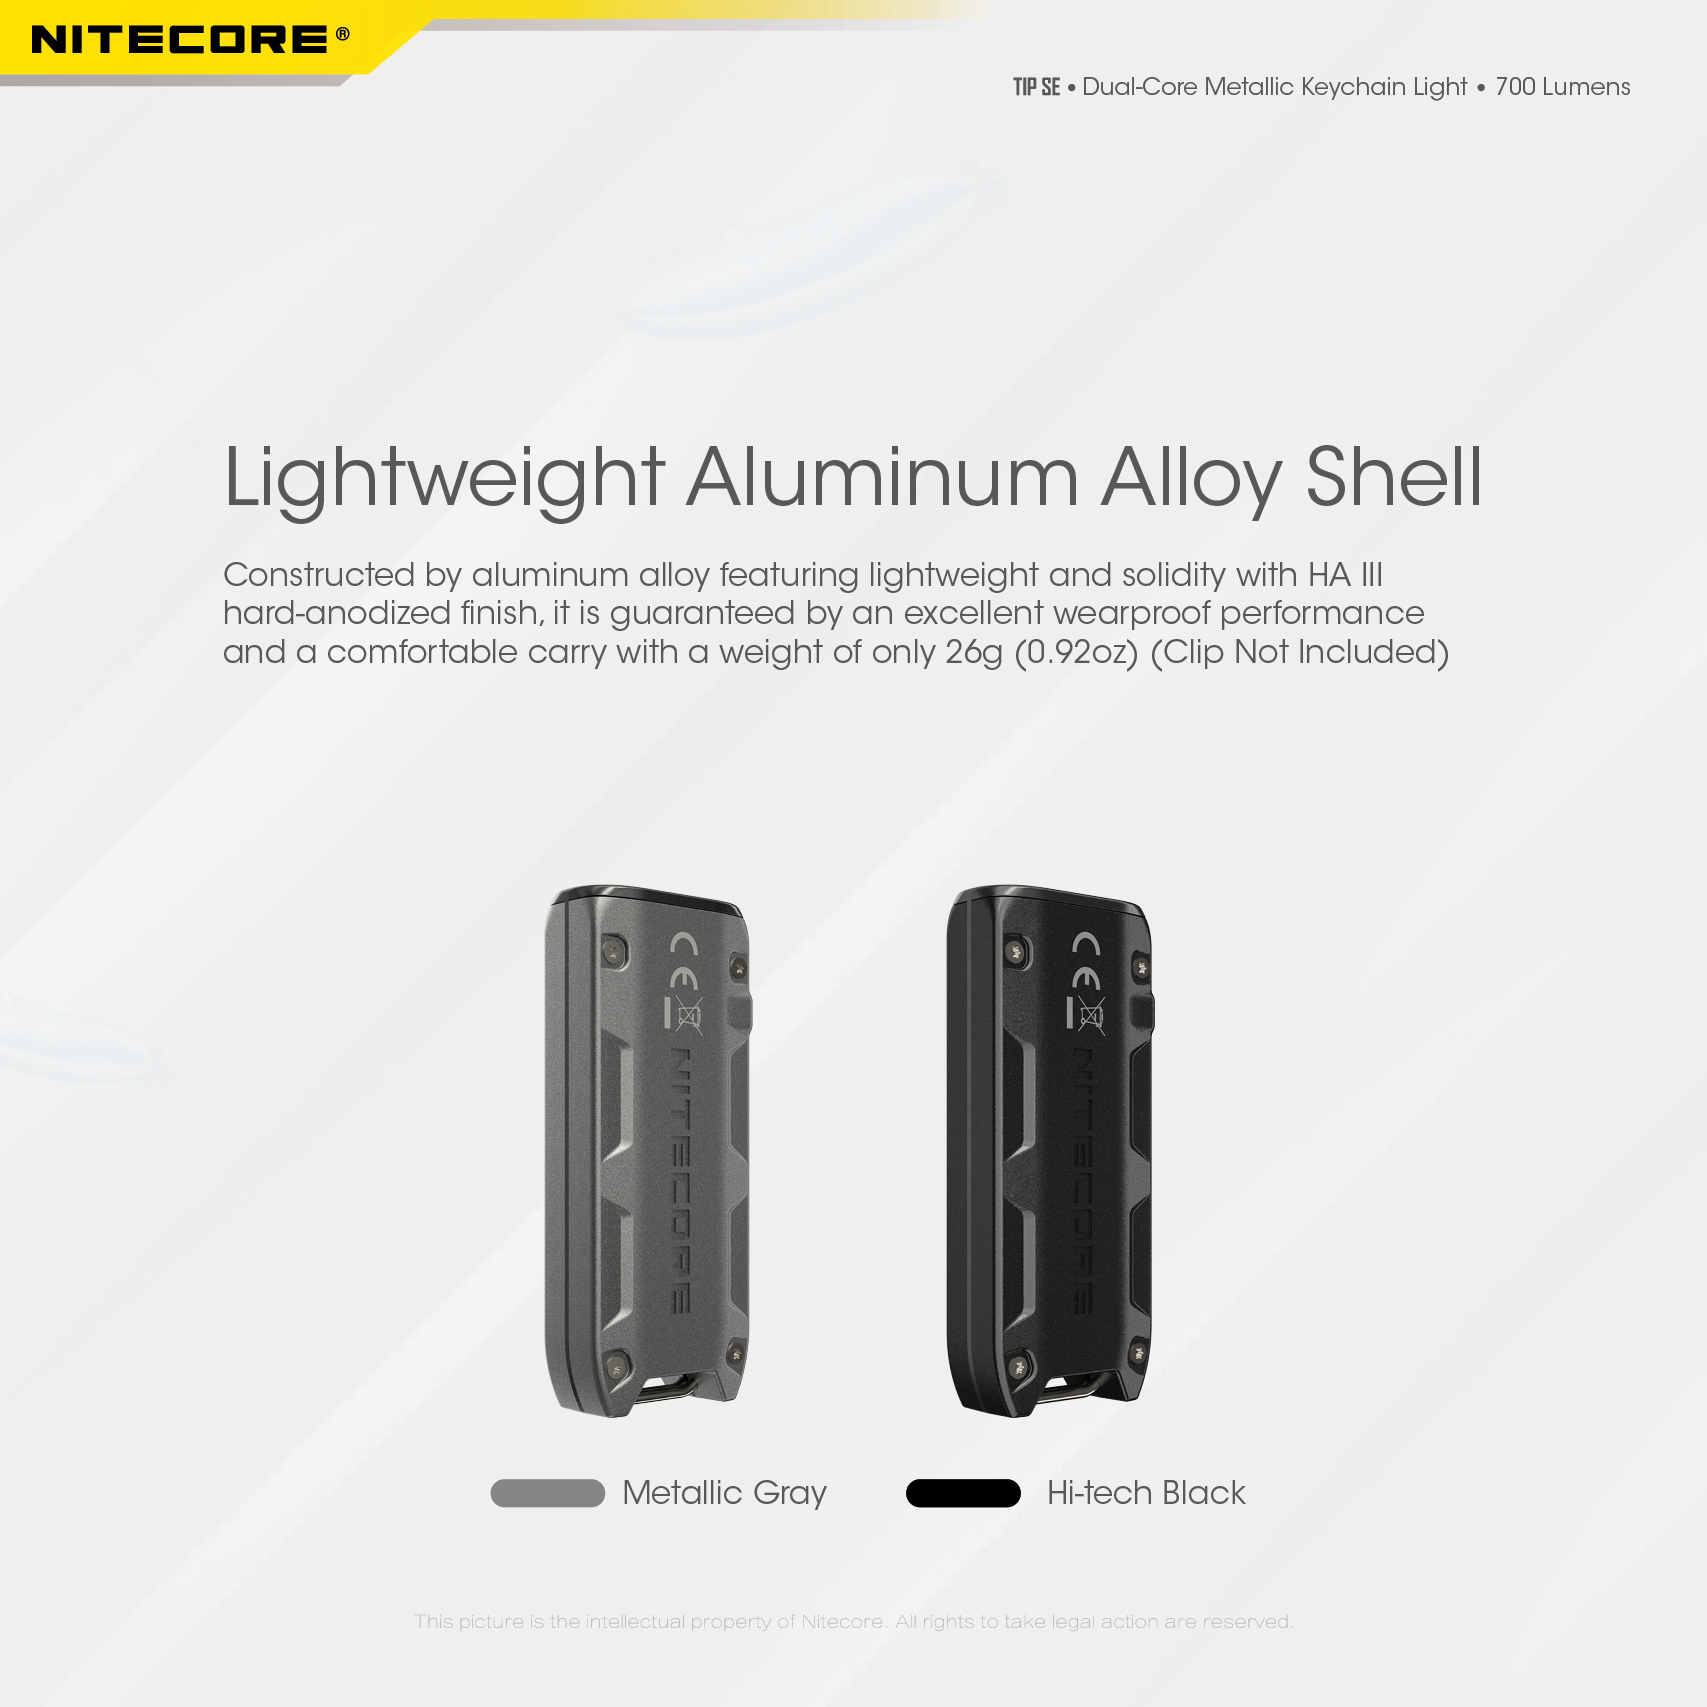 NITECORE-TIP-SE-700LM-P8-Dual-Light-LED-Keychain-Flashlight-Type-C-Rechargeable-QC-Every-Day-Carry-M-1976045-5